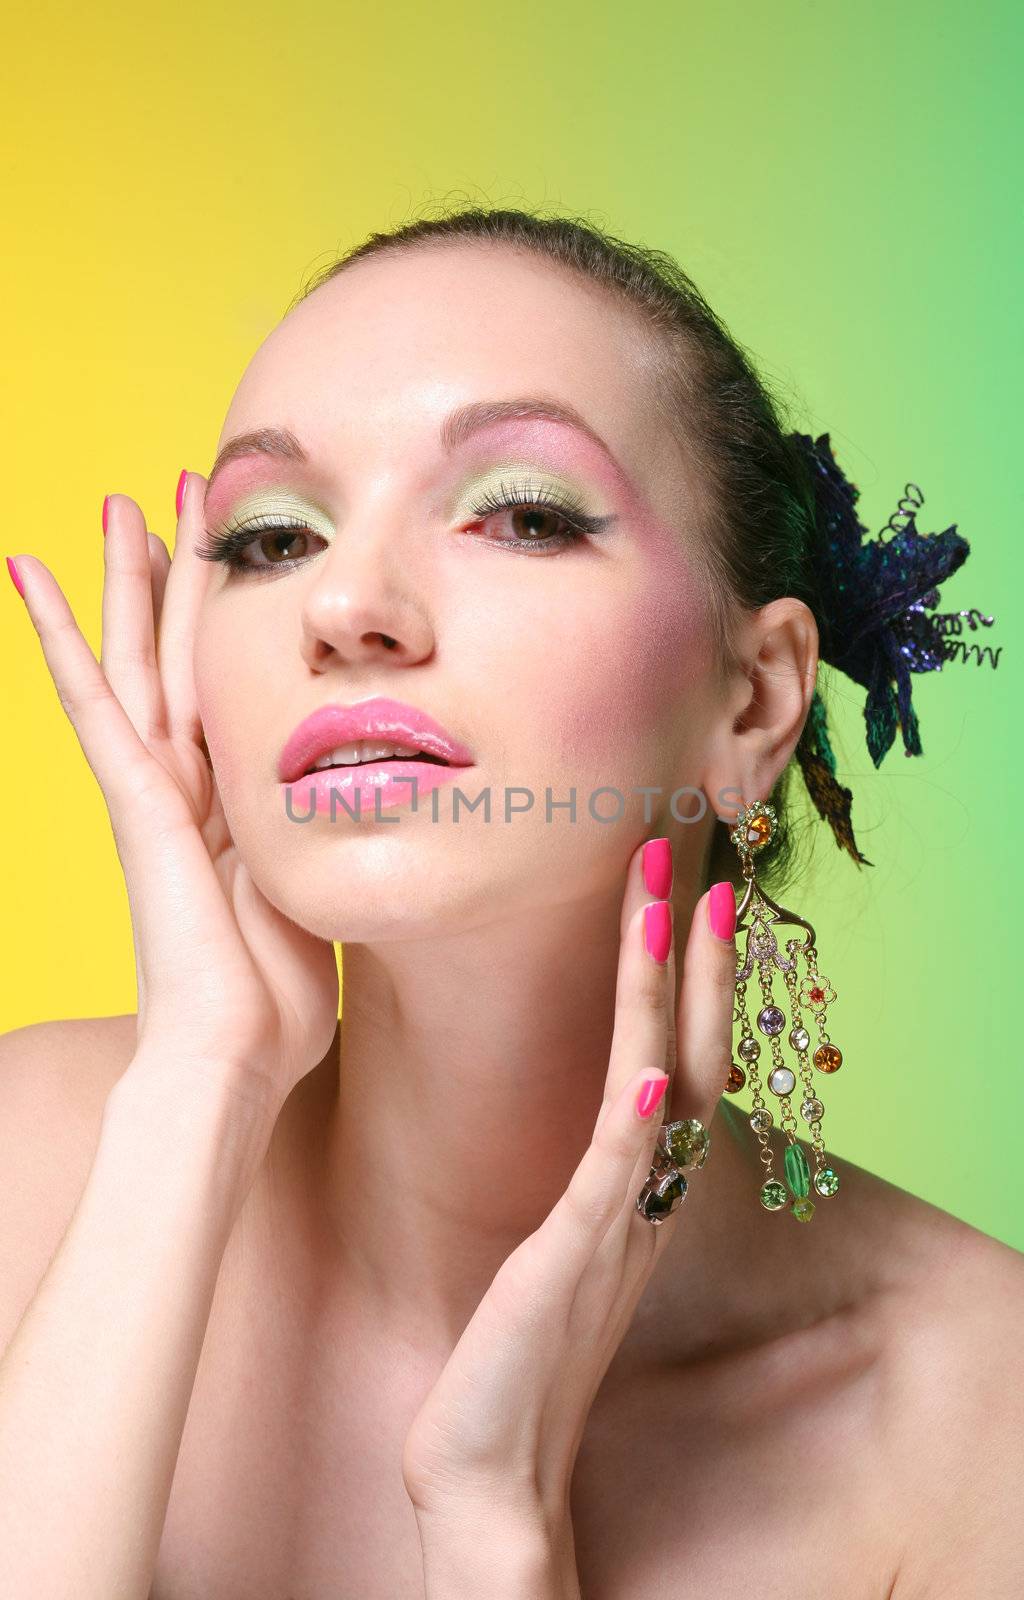 beautiful girl with make up on yellow-green background